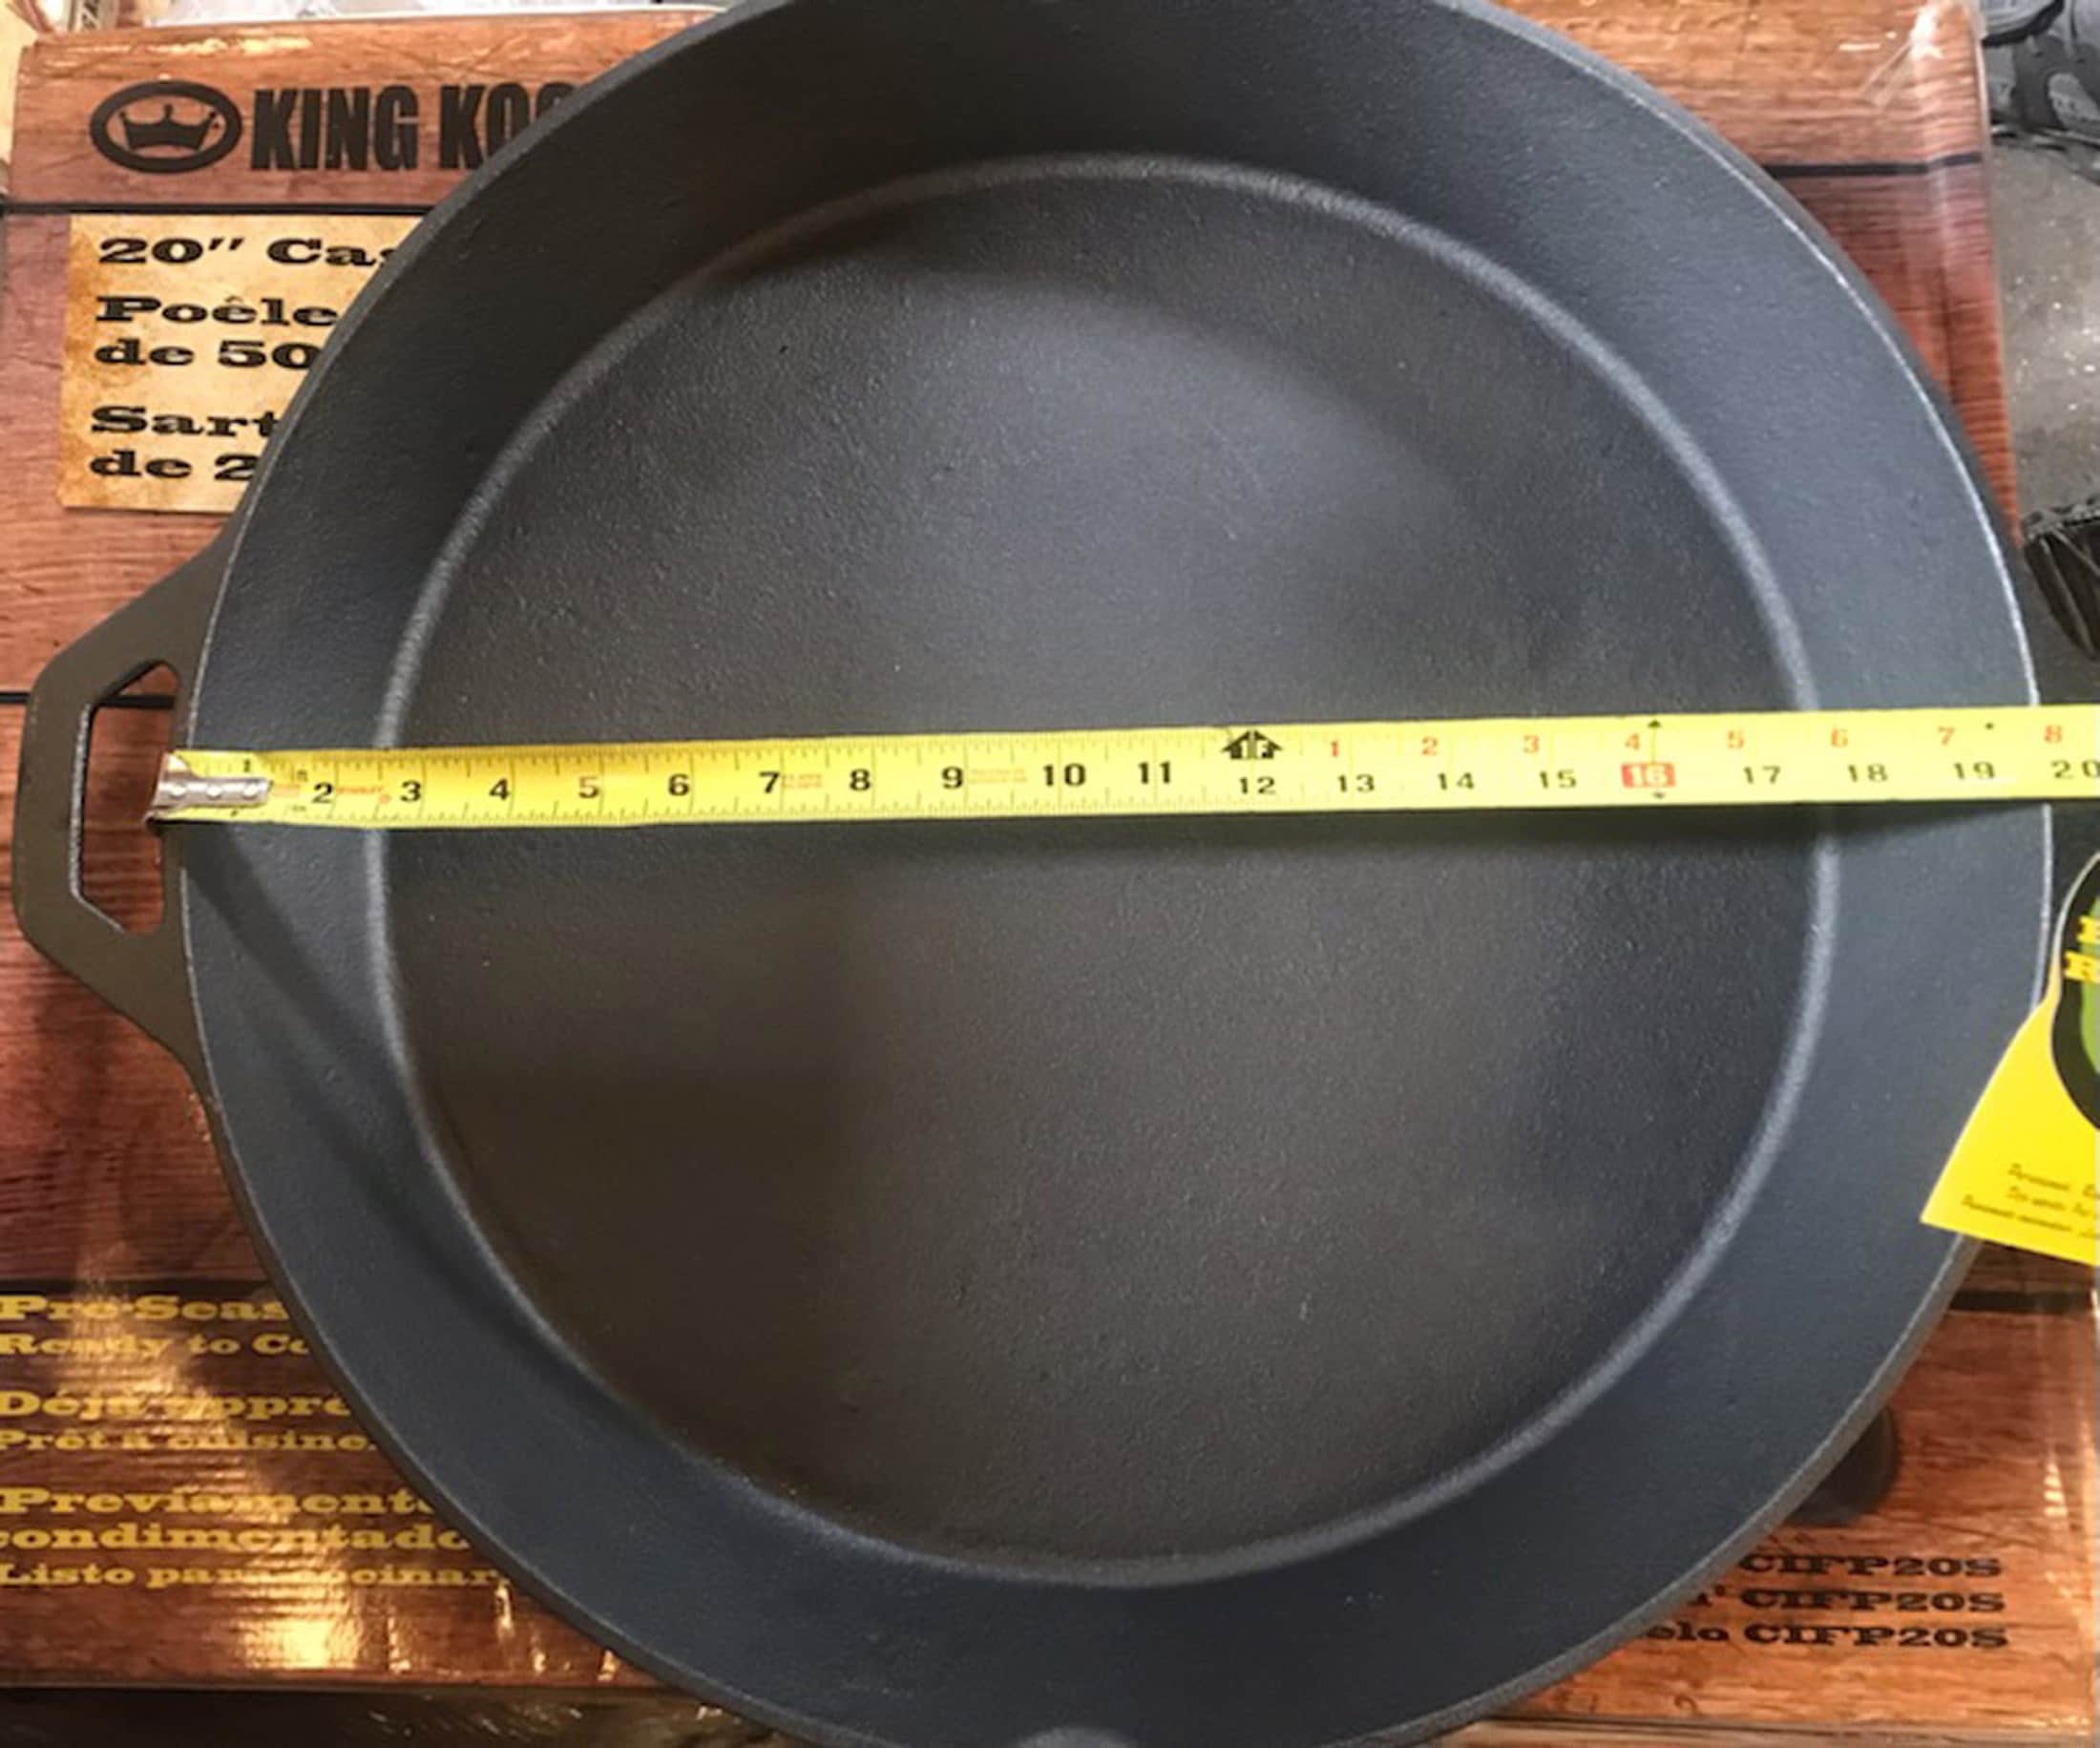 Cast Iron Skillet 12.5 Inches Pre-Seasoned Wholesale Lot of 4